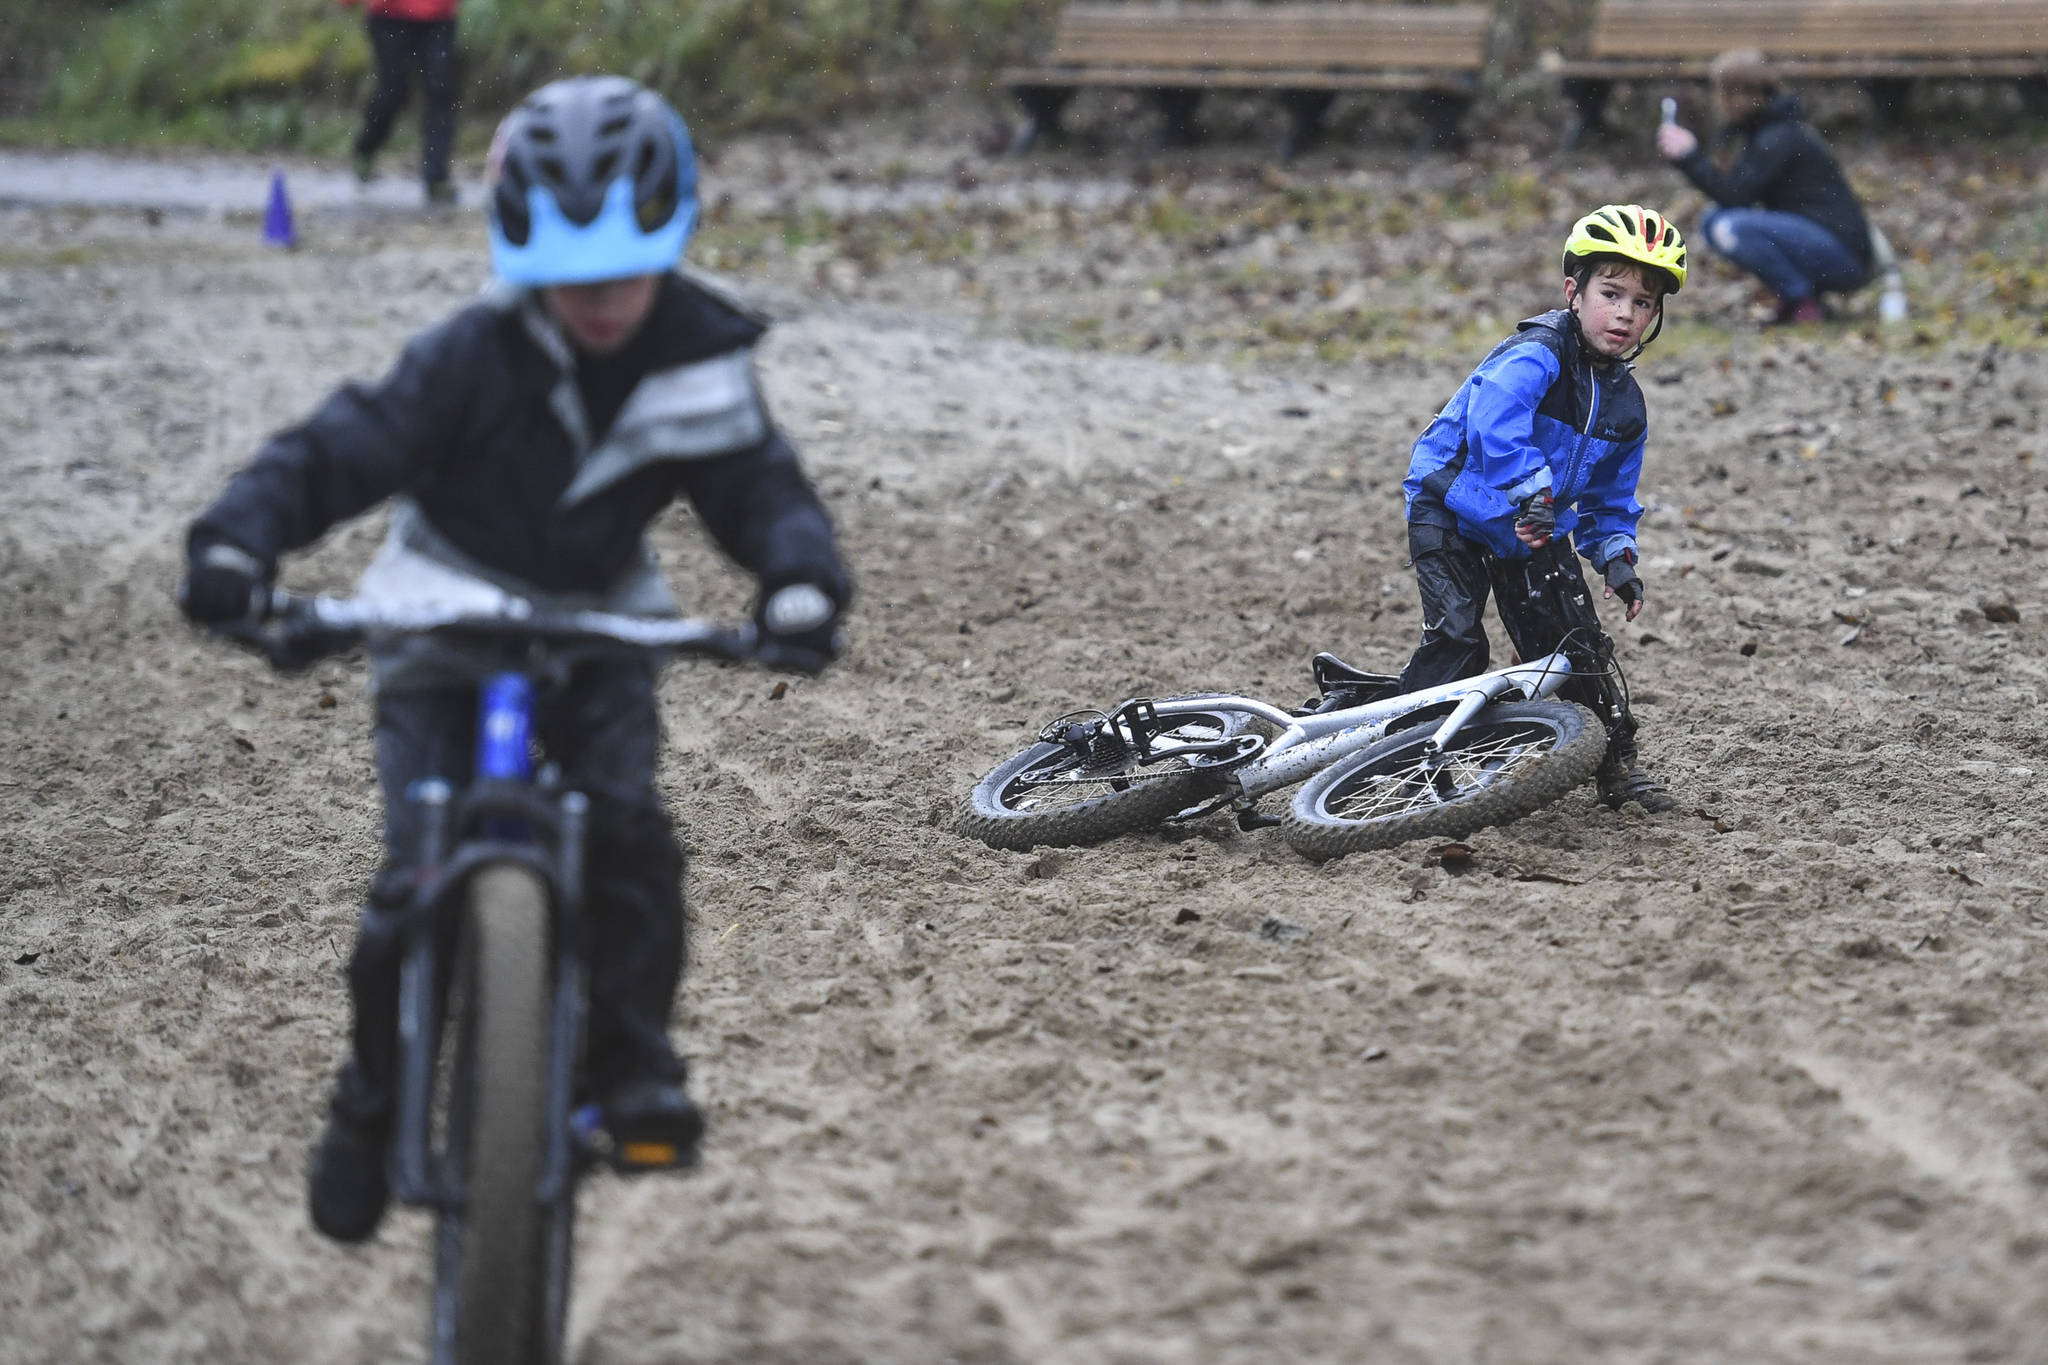 Pearson Fagel, 6, takes a spill at the finish of the Douglas Dirt Derby Youth Bike Race for 5 to 7-year-olds at Savikko Park and the Treadwell Mine Historic Trail on Saturday, Oct. 5, 2019. The event was organized by the Juneau Freewheelers Bicycle Club. (Michael Penn | Juneau Empire)